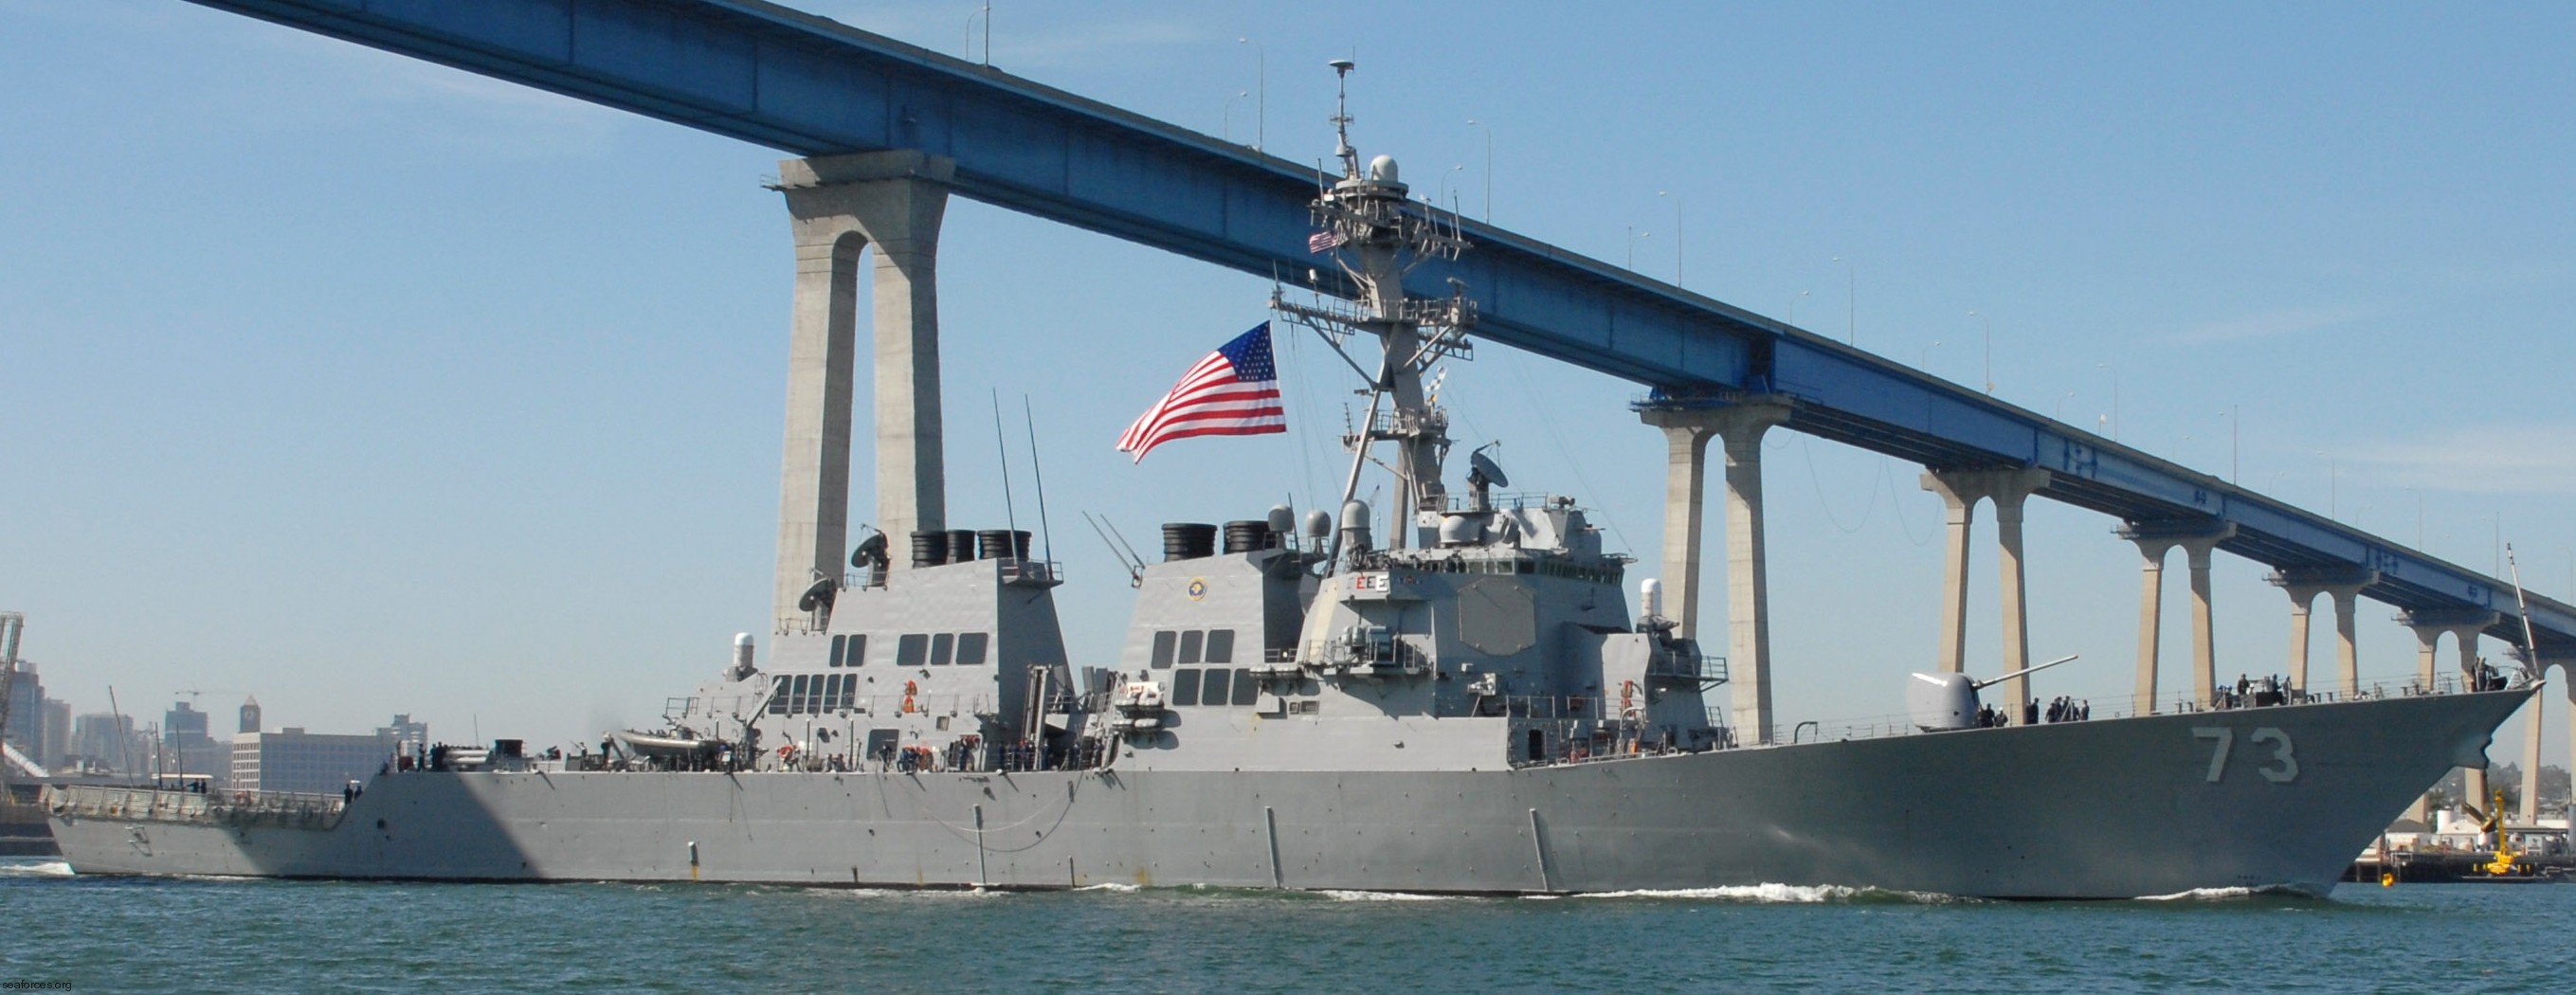 ddg-73 uss decatur guided missile destroyer arleigh burke class aegis bmd 31